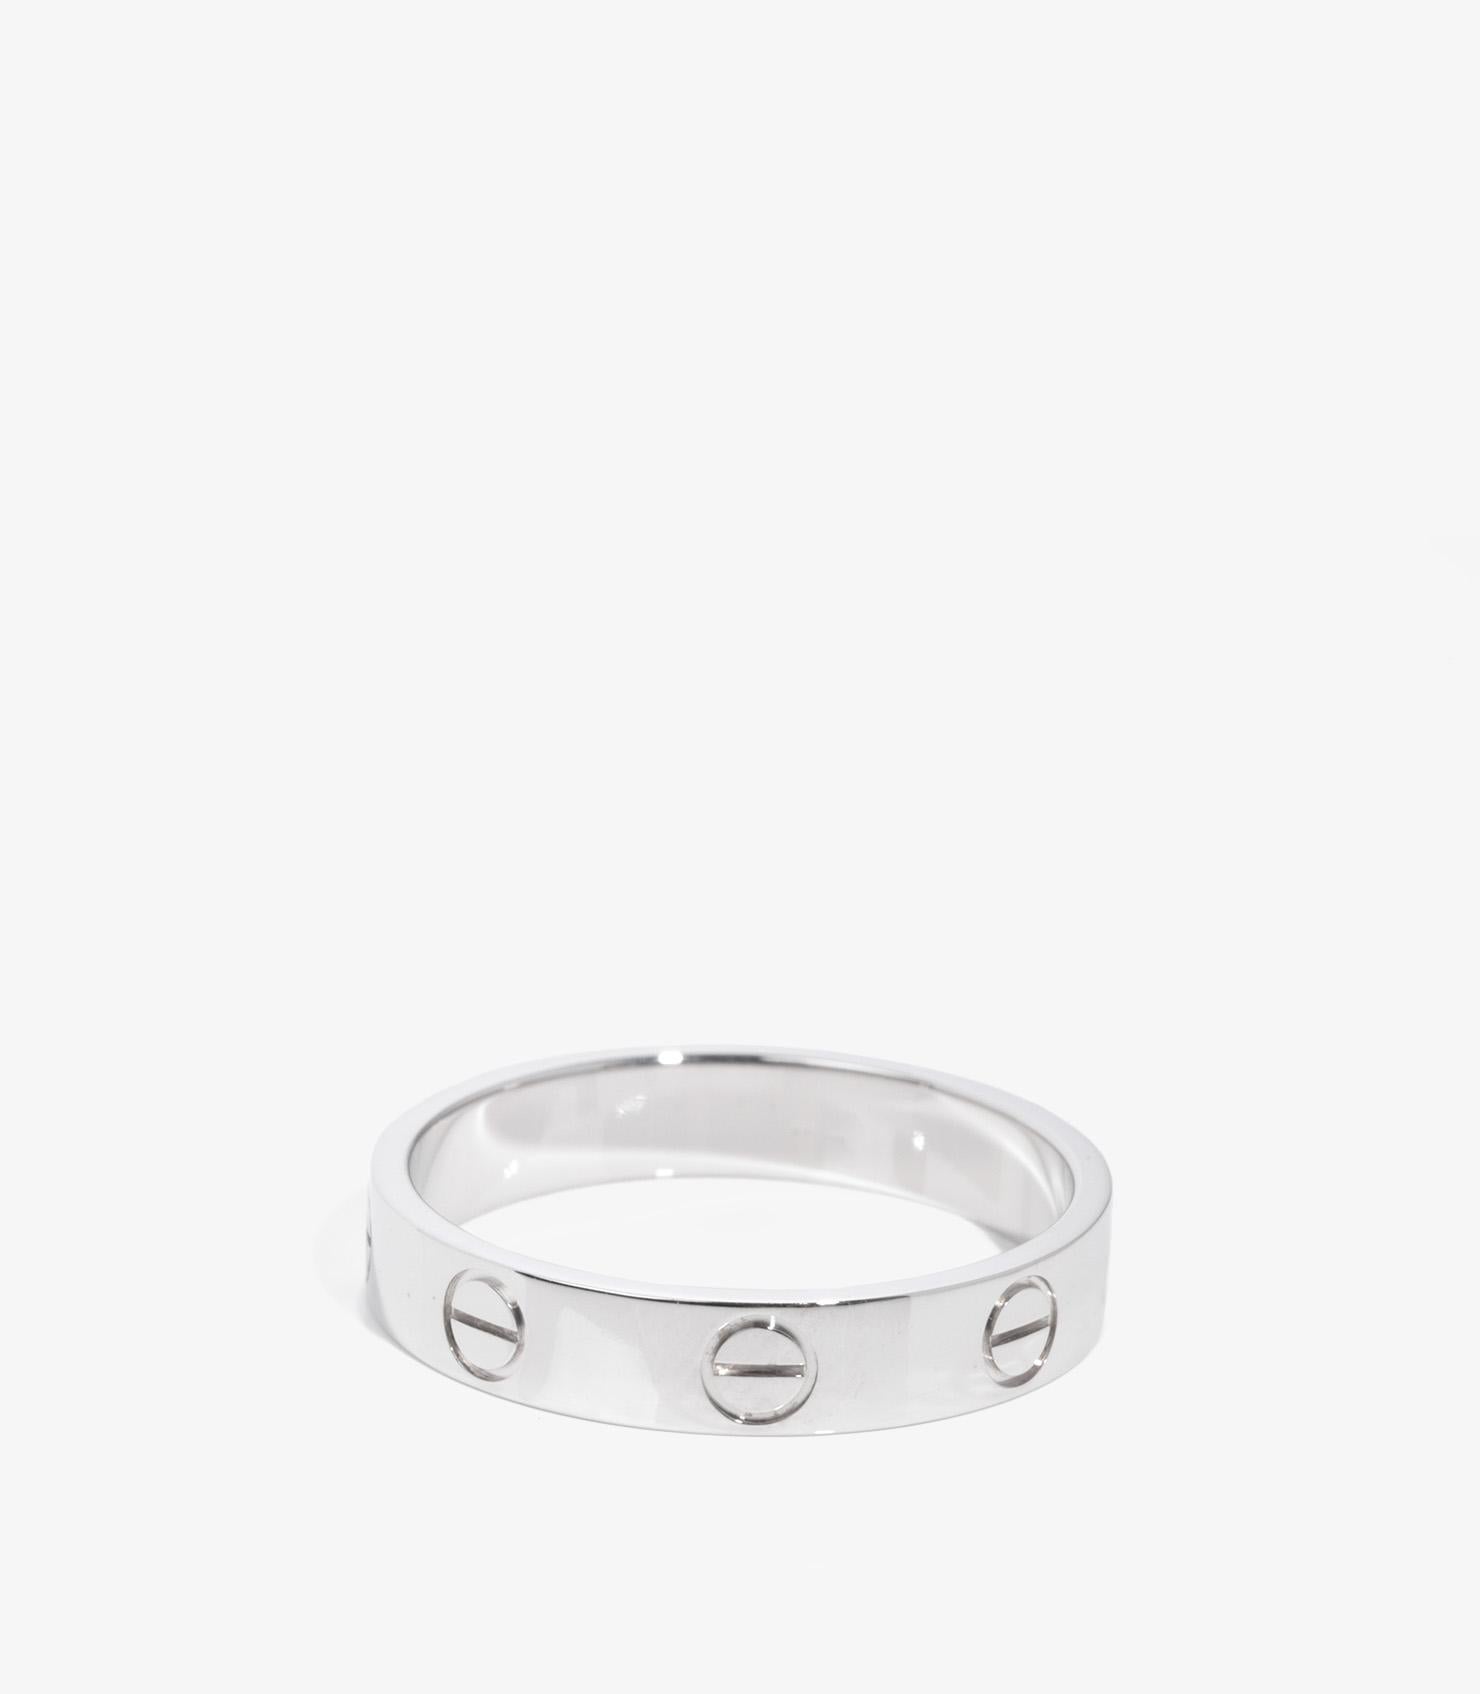 Cartier 18ct White Gold Love Wedding Band Ring

Brand- Cartier
Model- Love Wedding Band
Product Type- Ring
Serial Number- CU****
Accompanied By- Cartier Box
Material(s)- 18ct White Gold
UK Ring Size- M 1/2
EU Ring Size- 53
US Ring Size- 6